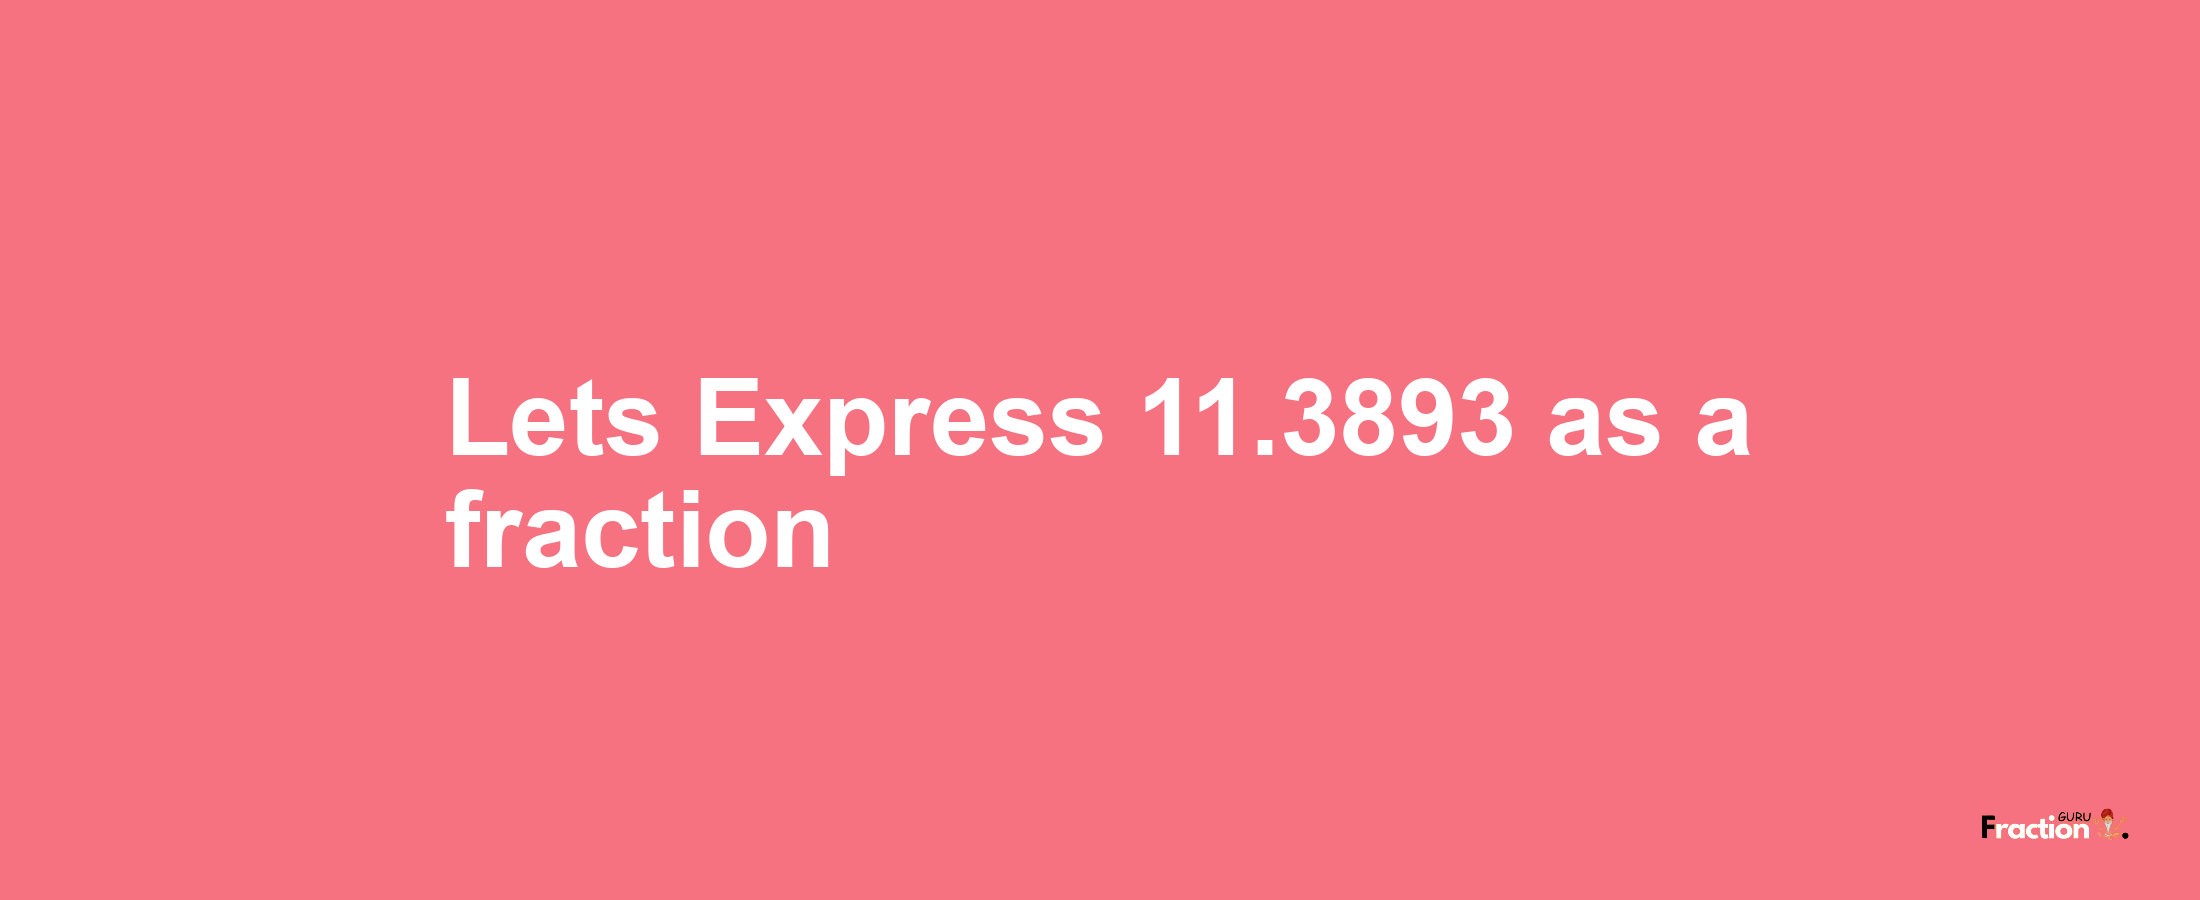 Lets Express 11.3893 as afraction